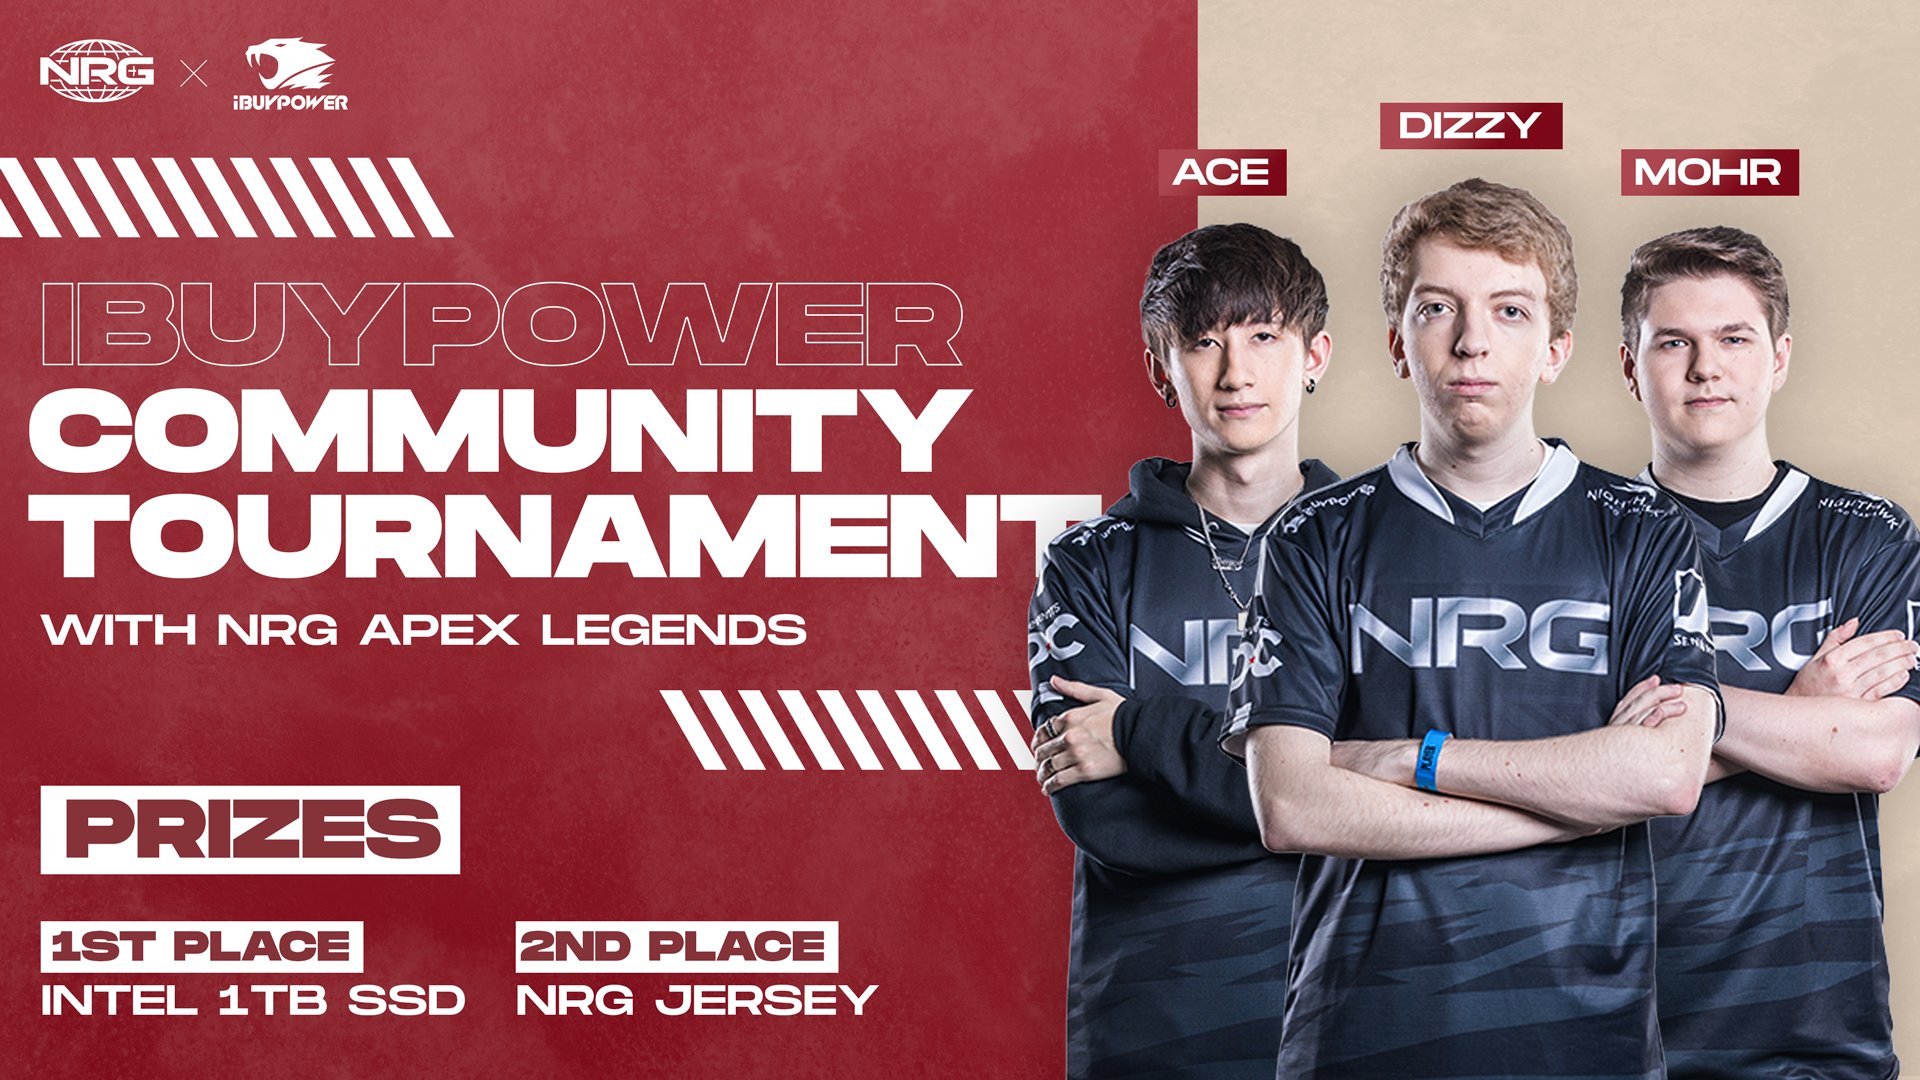 Nrg Current Hey Nrgfam Come Support The Apex Squad As They Play In The Ibuypower th Anniversary Community Tournament Against Each Other Ibpanniversary Dizzy T Co Nkow3tuff1 Ace T Co Epupw3kupq Mohr T Co